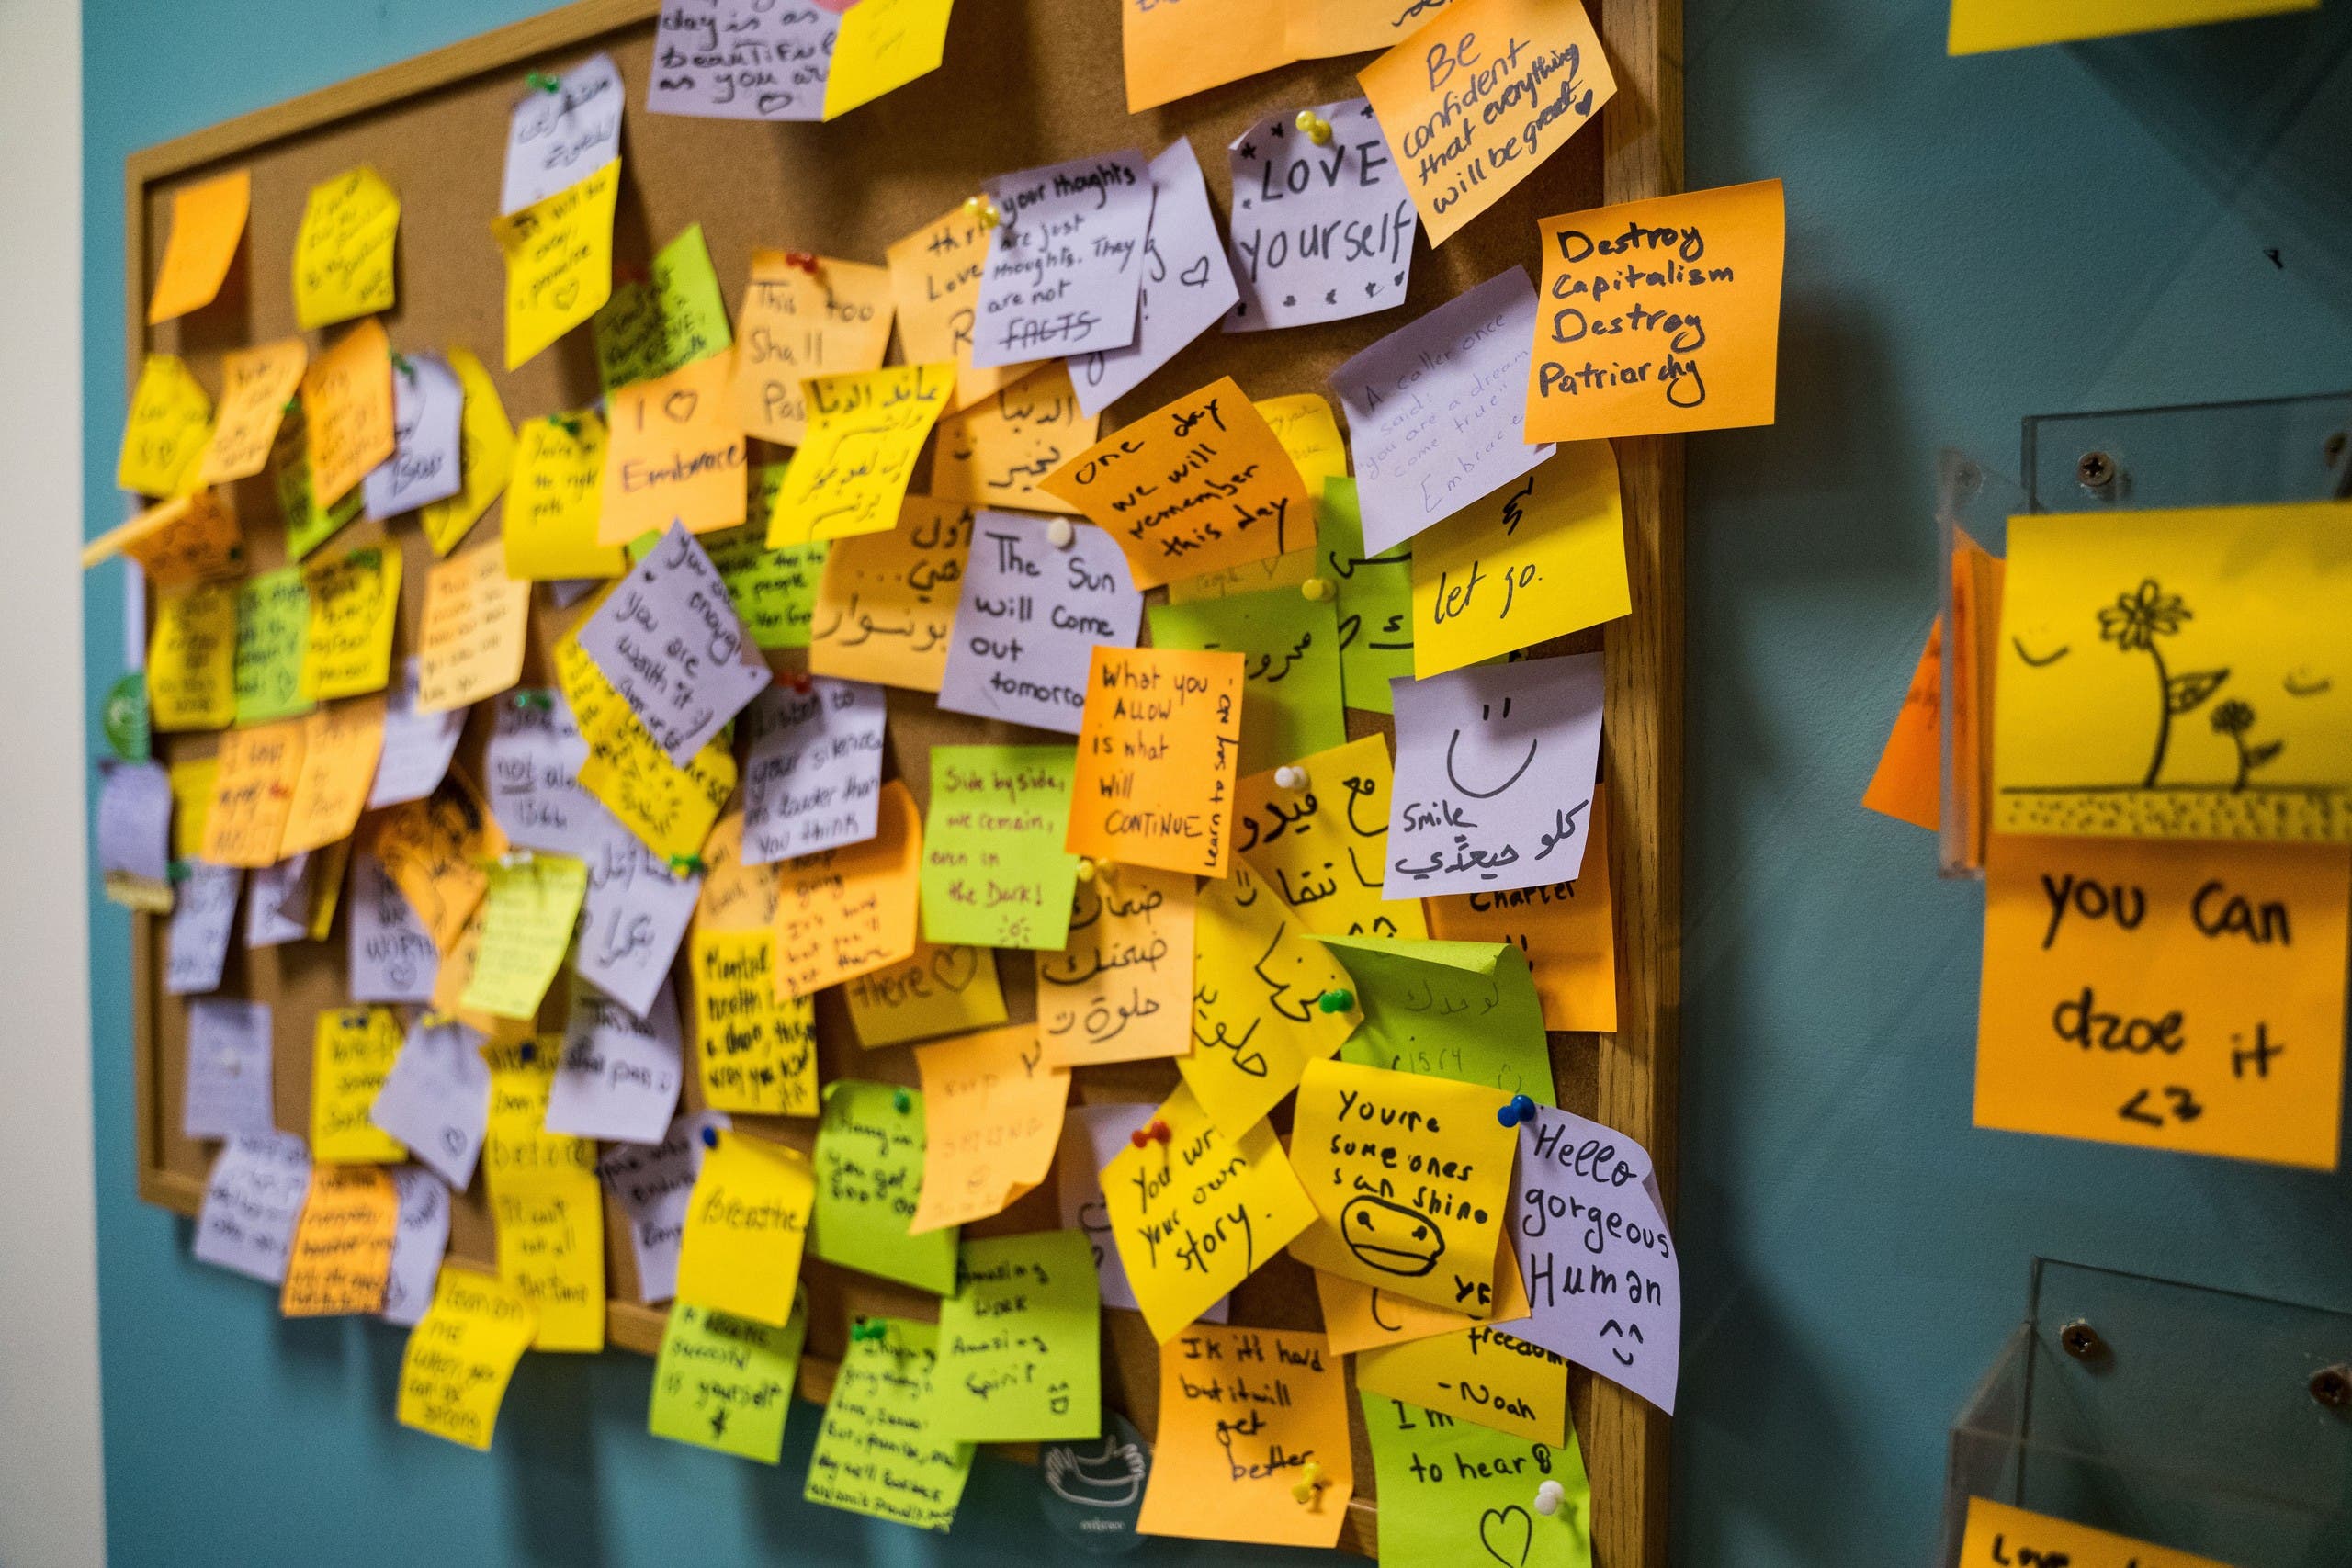 Post-it board at Embrace Community Mental Health Center on which patients and caregivers can leave words of encouragement. (Photo: Clement Gibon)